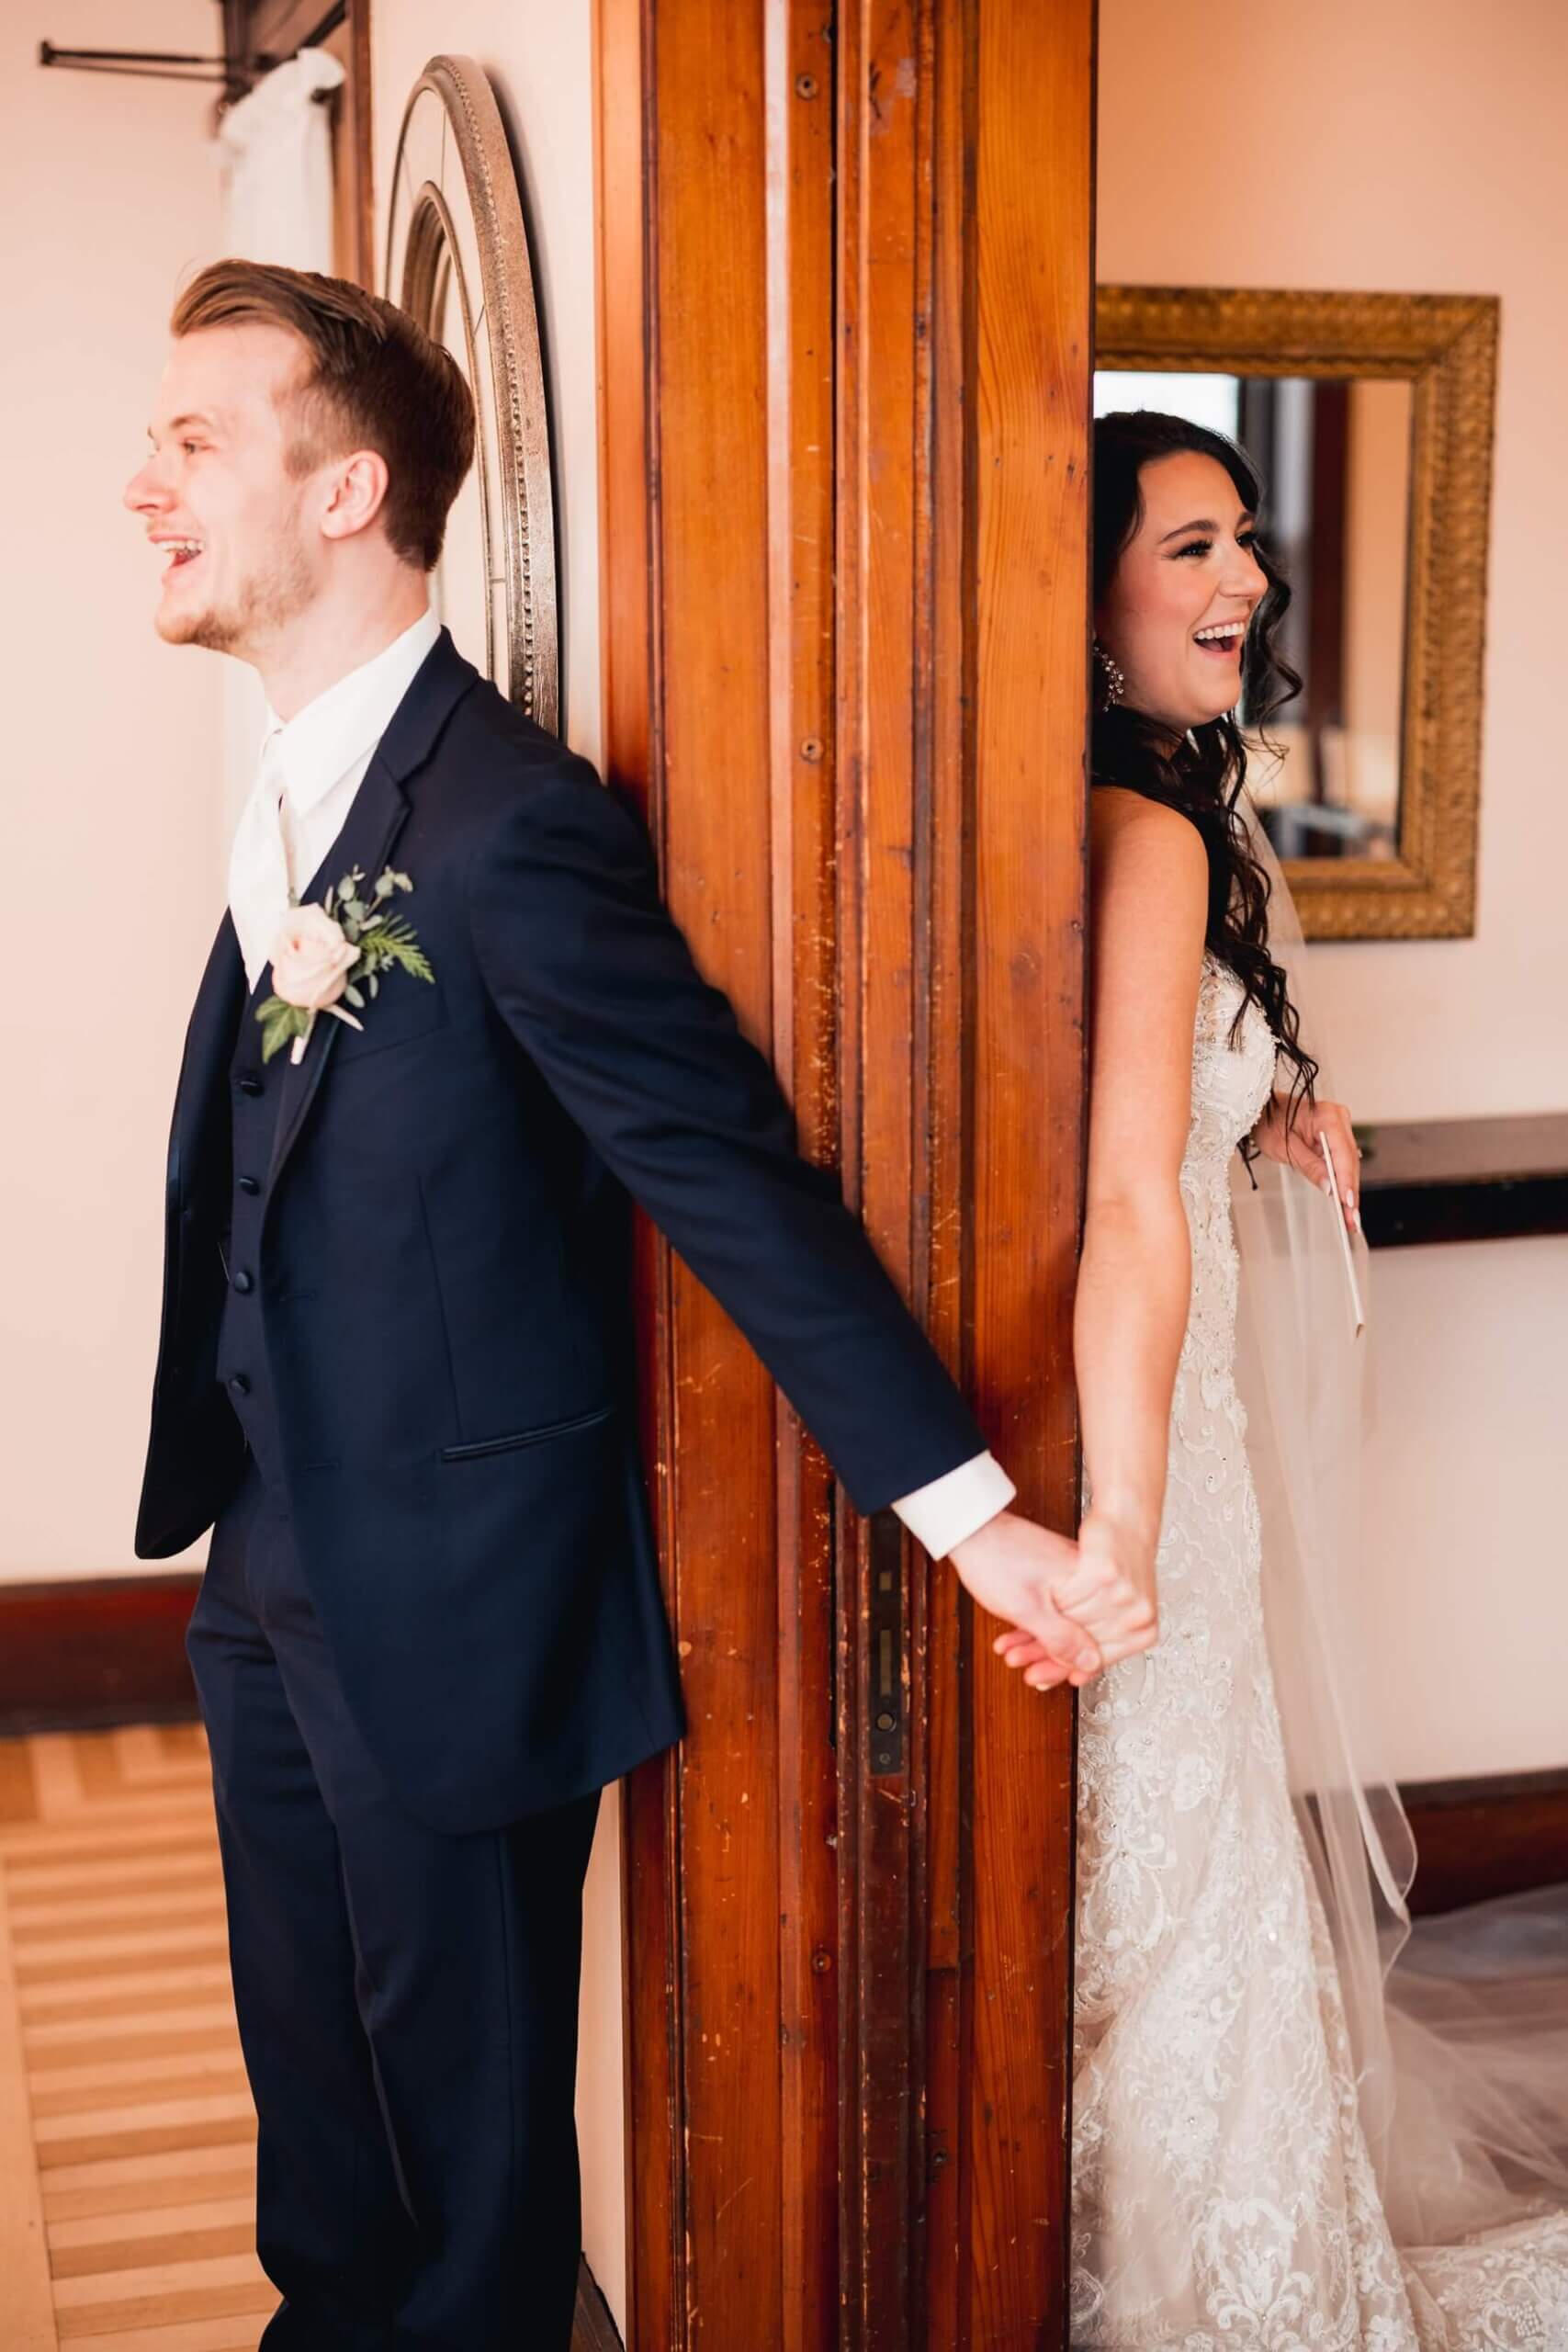 Bride and groom holding hands around wall at wedding venue in Illinois